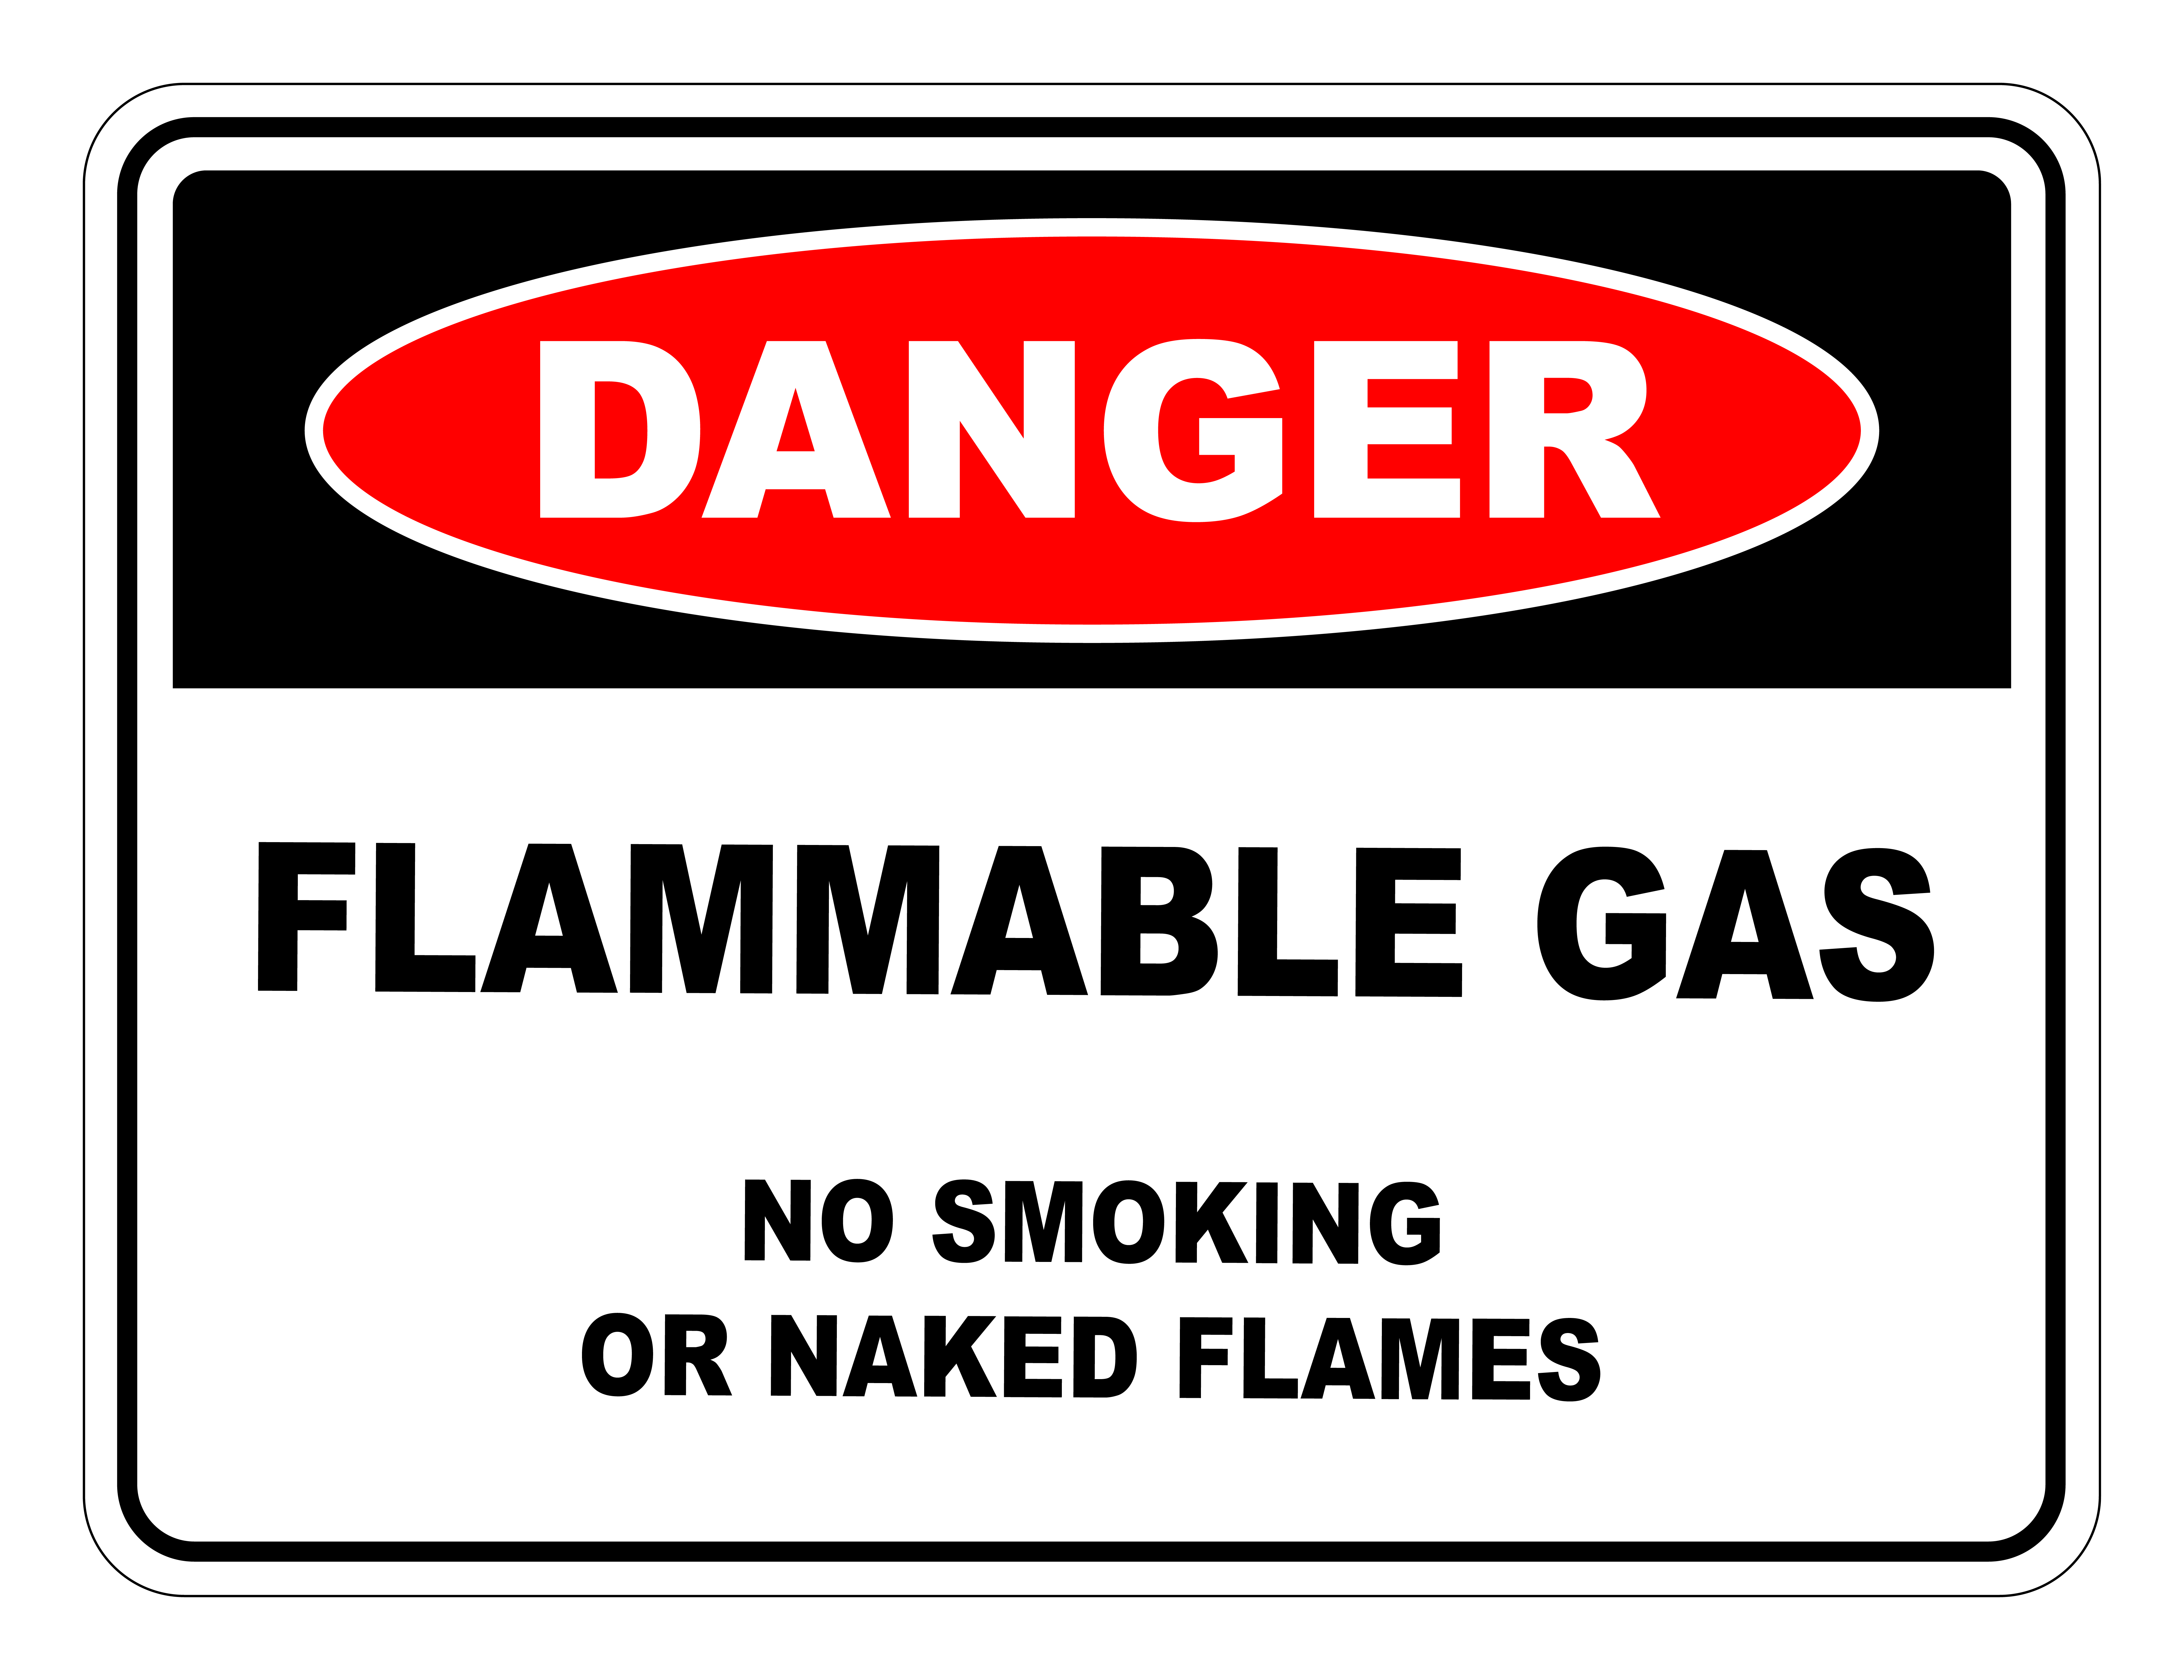 Flammable Gas No Smoking Or Naked Flames Danger Safety Sign Safety